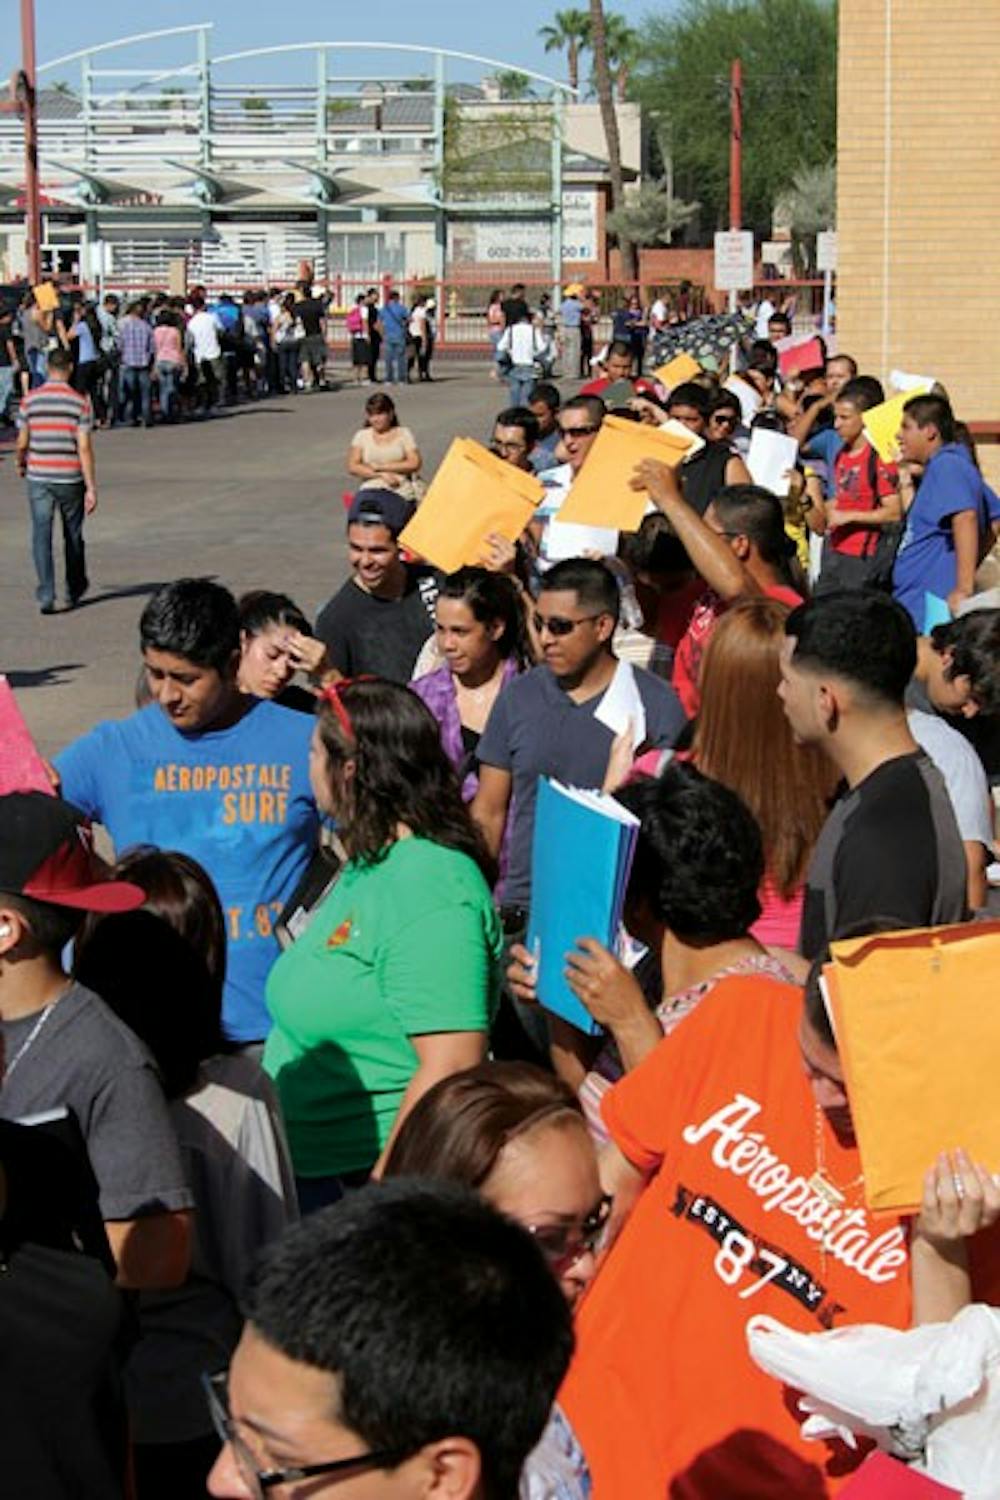 Three thousand DREAMers and supporters lined up for a Deferred Action Application Clinic-Workshop at Central High School Saturday morning. DREAMers are a group of undocumented immigrants who were recently denied public benefits such as scholarships. (Photo by Ana Ramirez)